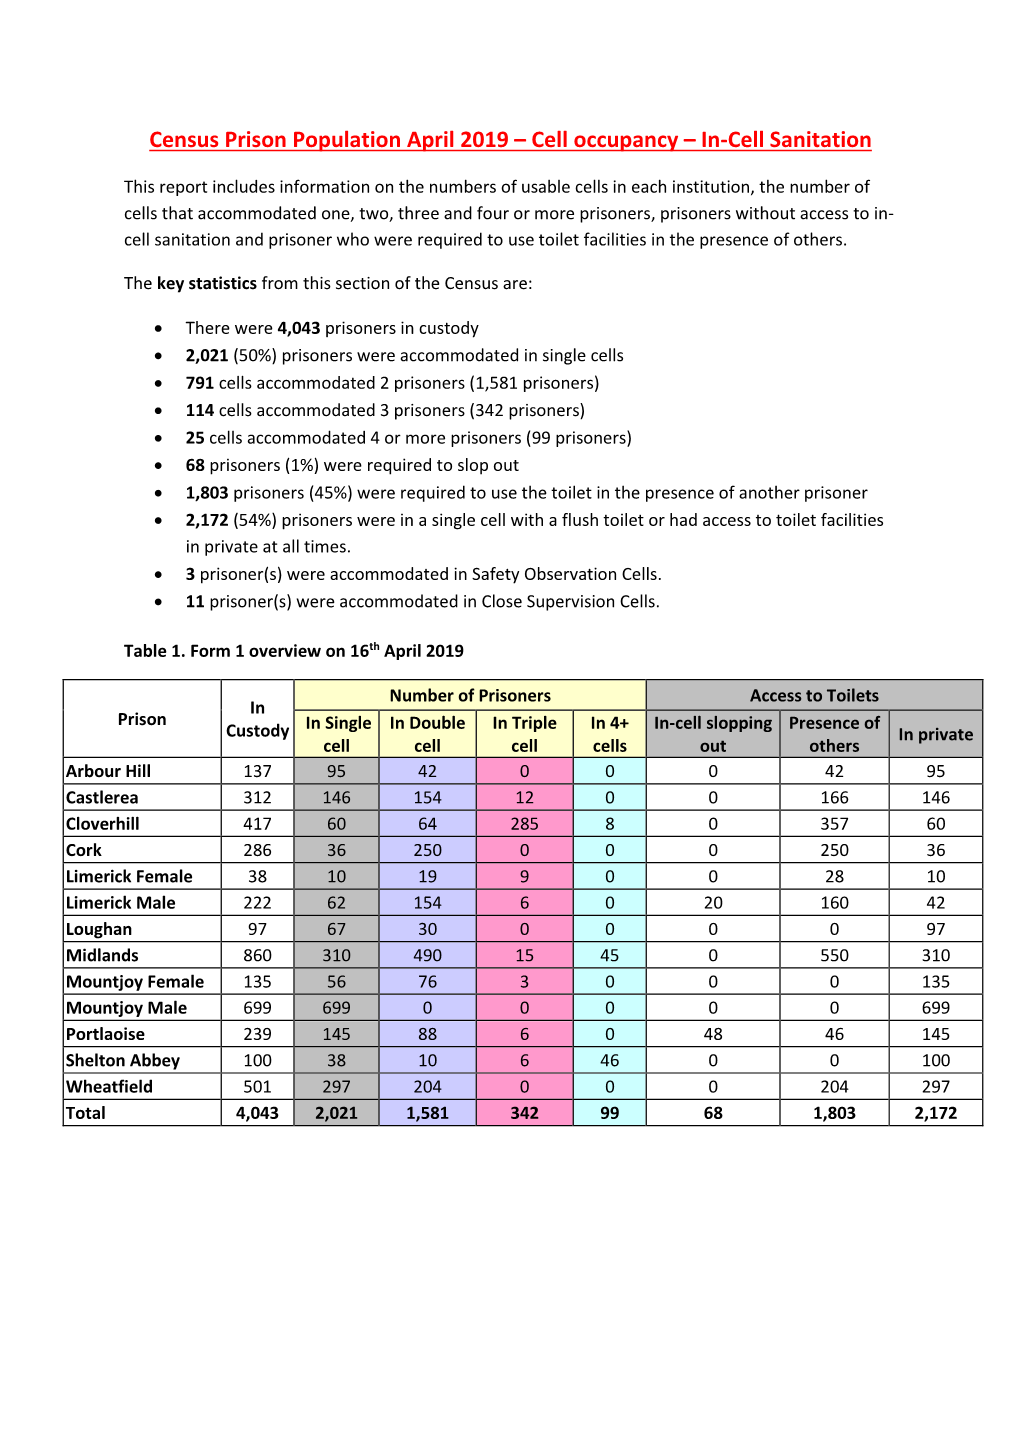 Census of Cell Occupancy and In-Cell Sanitation April 2019